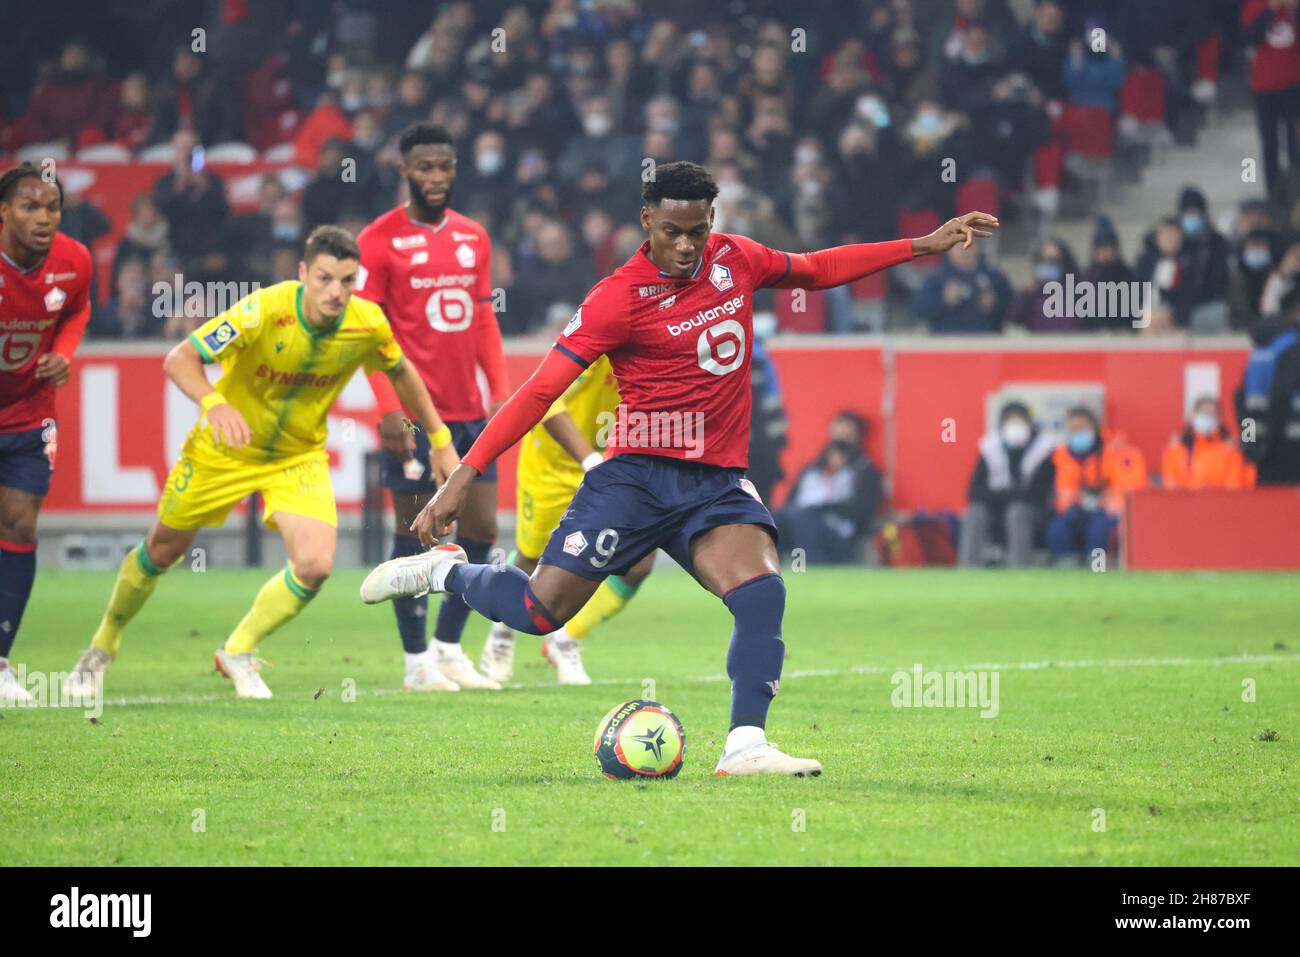 Shoot penalty Jonathan DAVID 9 LOSC during the French championship Ligue 1 football match between LOSC Lille and FC Nantes on November 27, 2021 at Pierre Mauroy stadium in Villeneuve-d'Ascq near Lille, France - Photo: Laurent Sanson/DPPI/LiveMedia Stock Photo